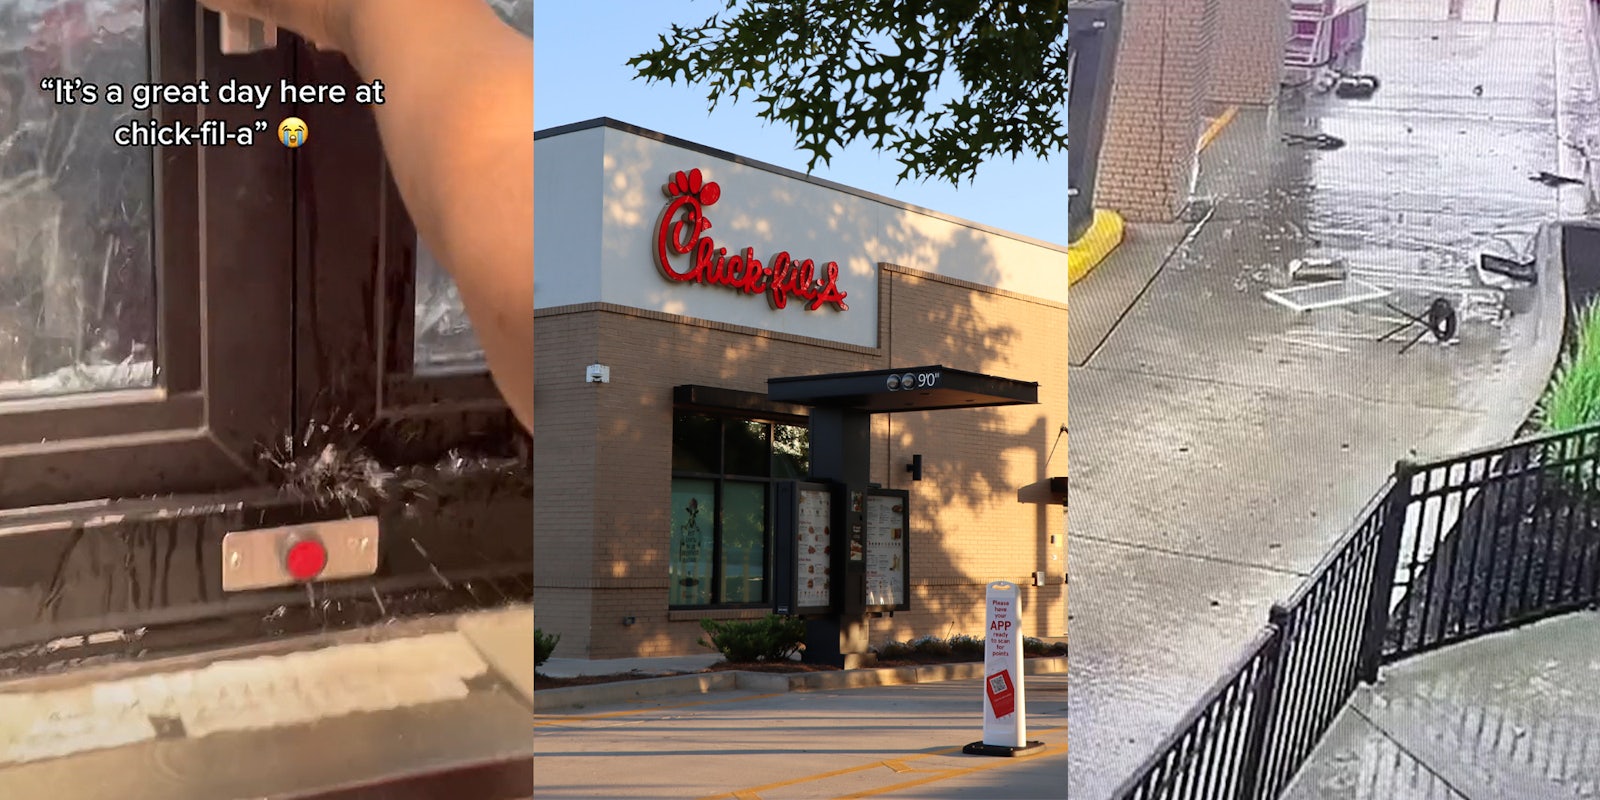 Chick -Fil- A drive thru window with rain spewing into kitchen caption 'It's a great day here at chick-fil-a' (l) Chick- Fil-A restaurant building and drive through (c) security camera footage at Chick-Fil-A parking lot showing storm damage knocked over chair (r)